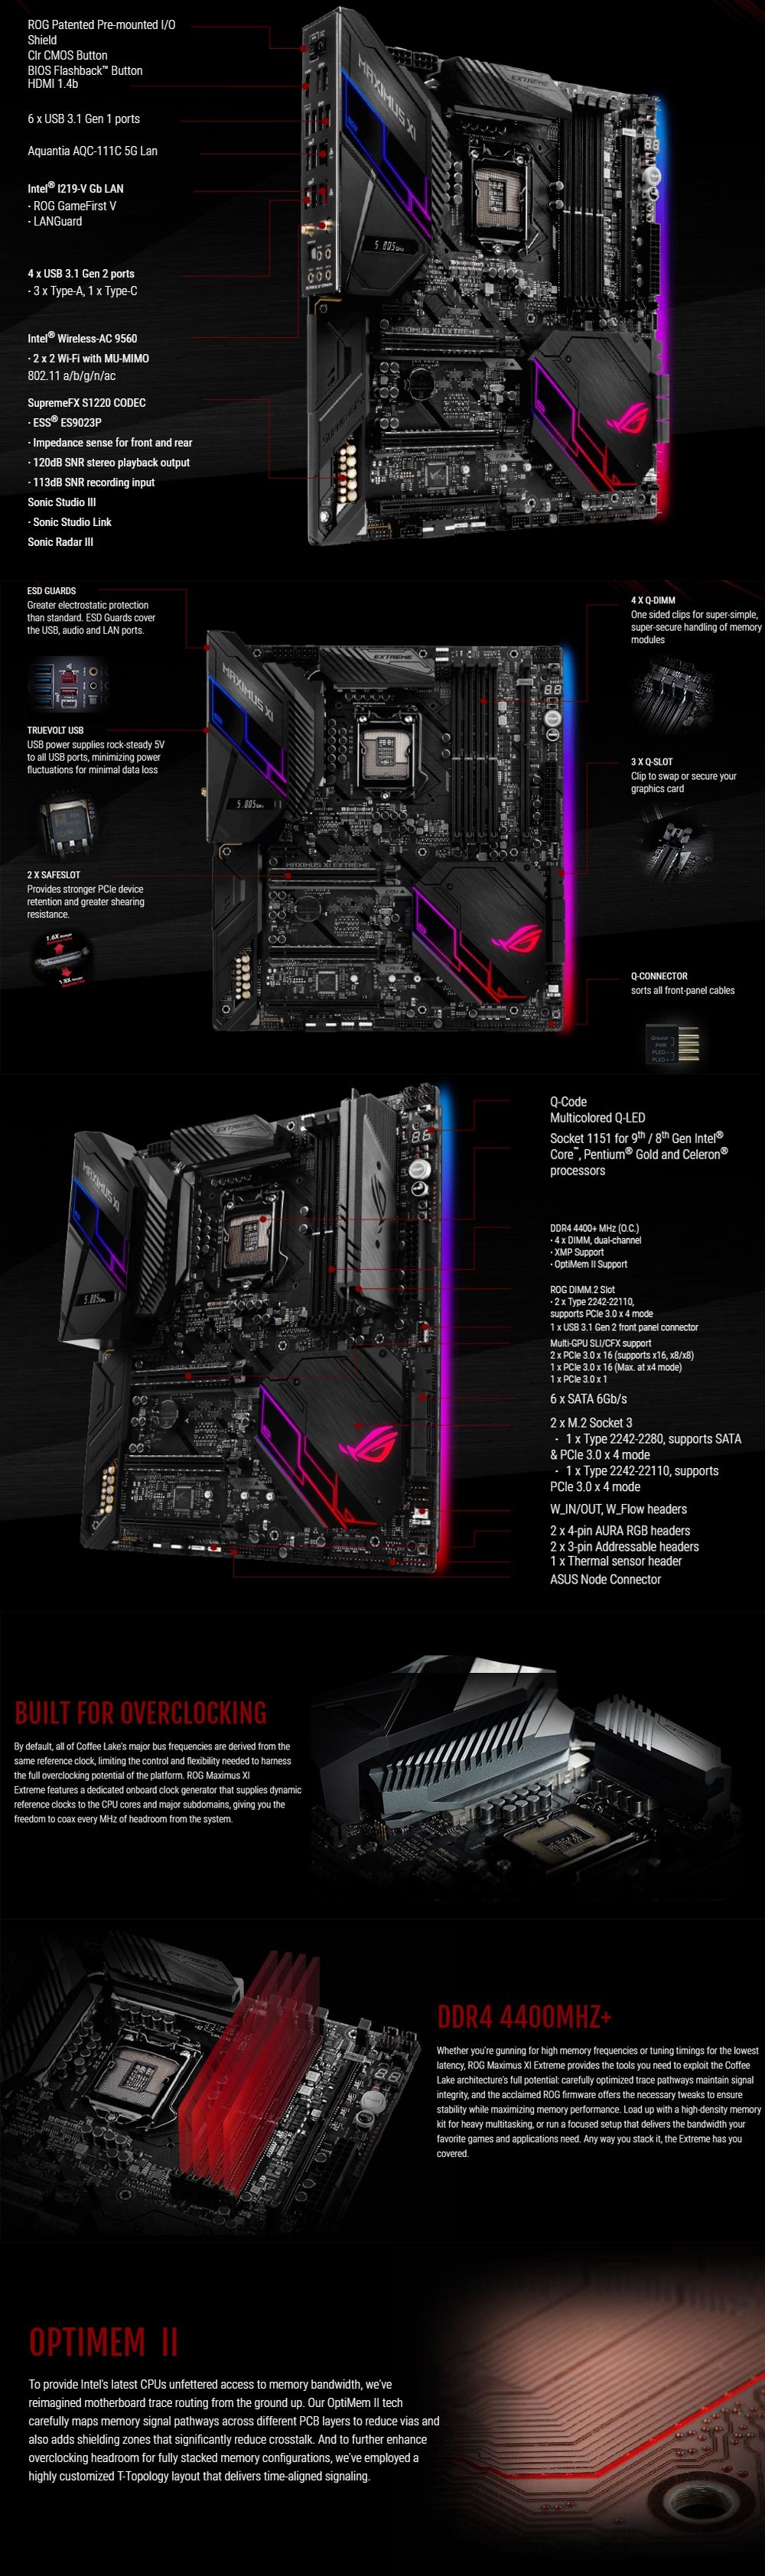 ASUS-ROG-MAXIMUS-XI-EXTREME-REPUBLIC-OF-GAMERS-Intelreg-Z390-Chip-E-ATX-Motherboard-with-80211ac-Wi--1604595